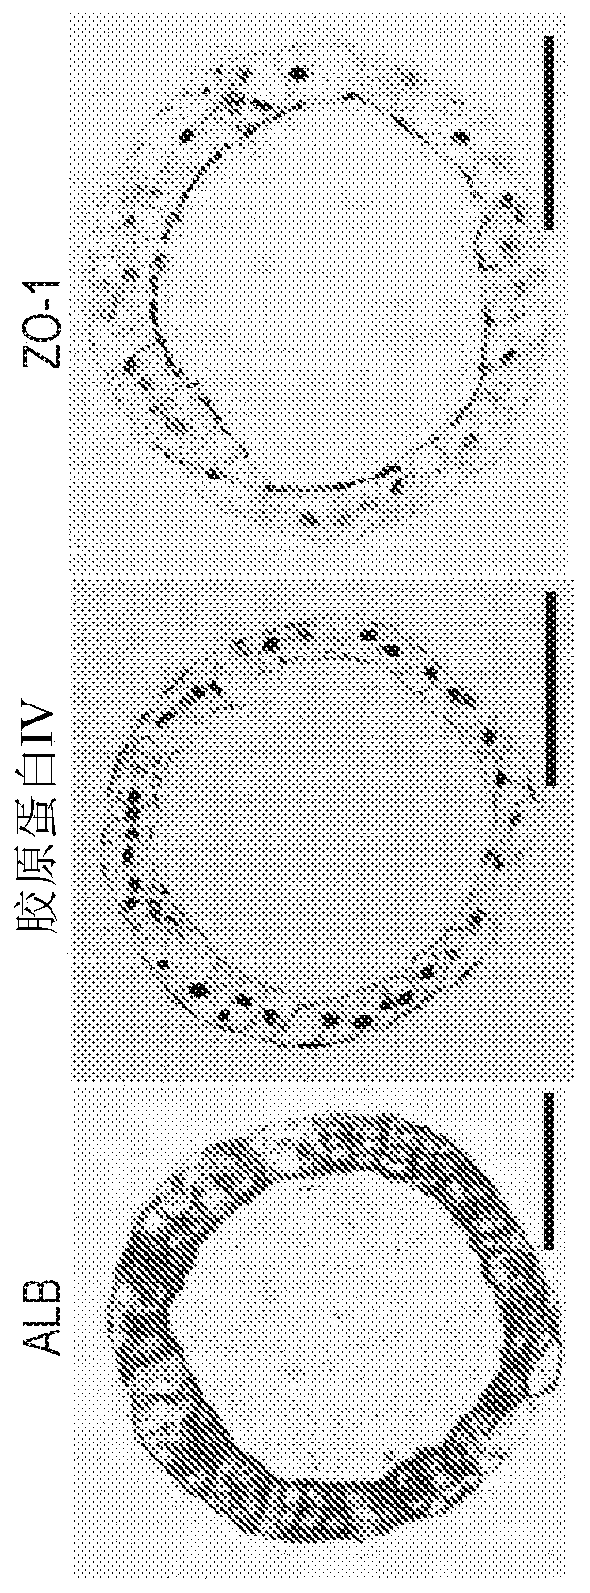 Liver organoid compositions and methods of making and using same